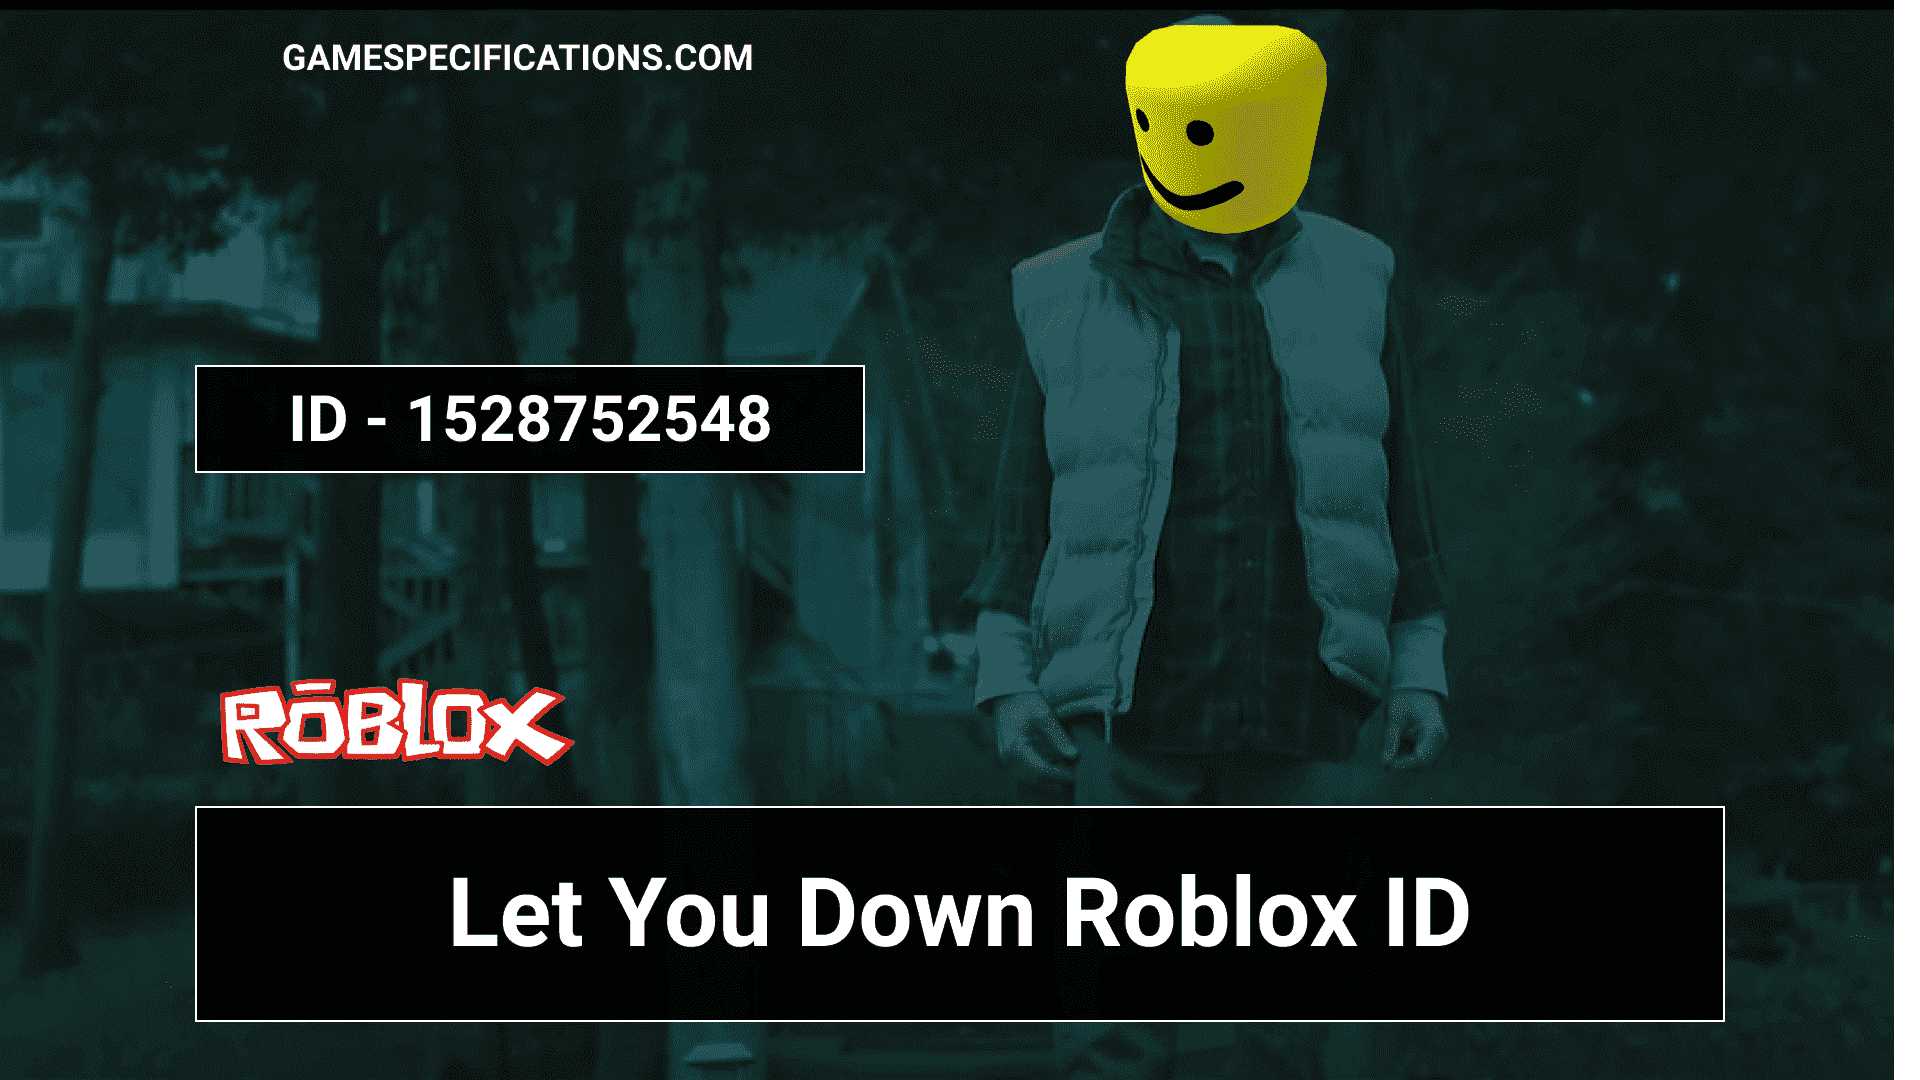 how long will roblox be down